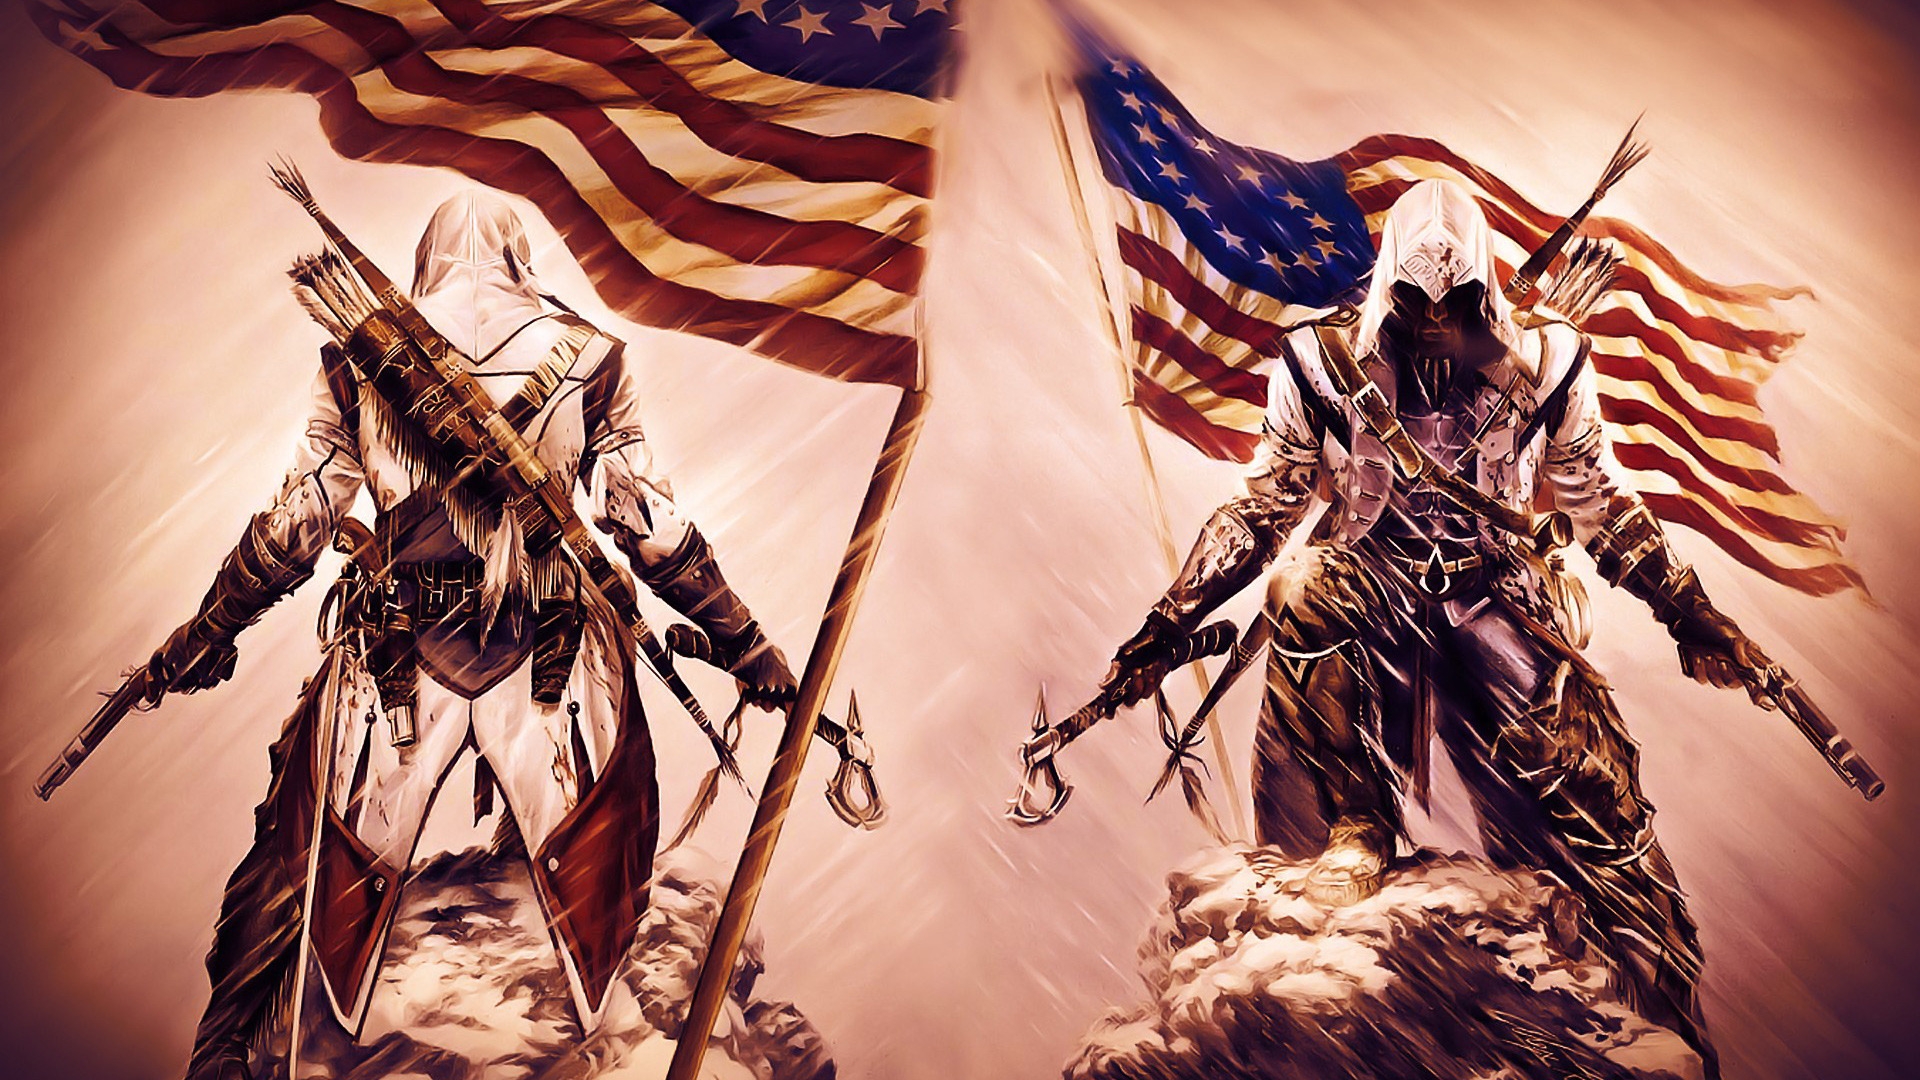 American Assassins Creed for 1920 x 1080 HDTV 1080p resolution